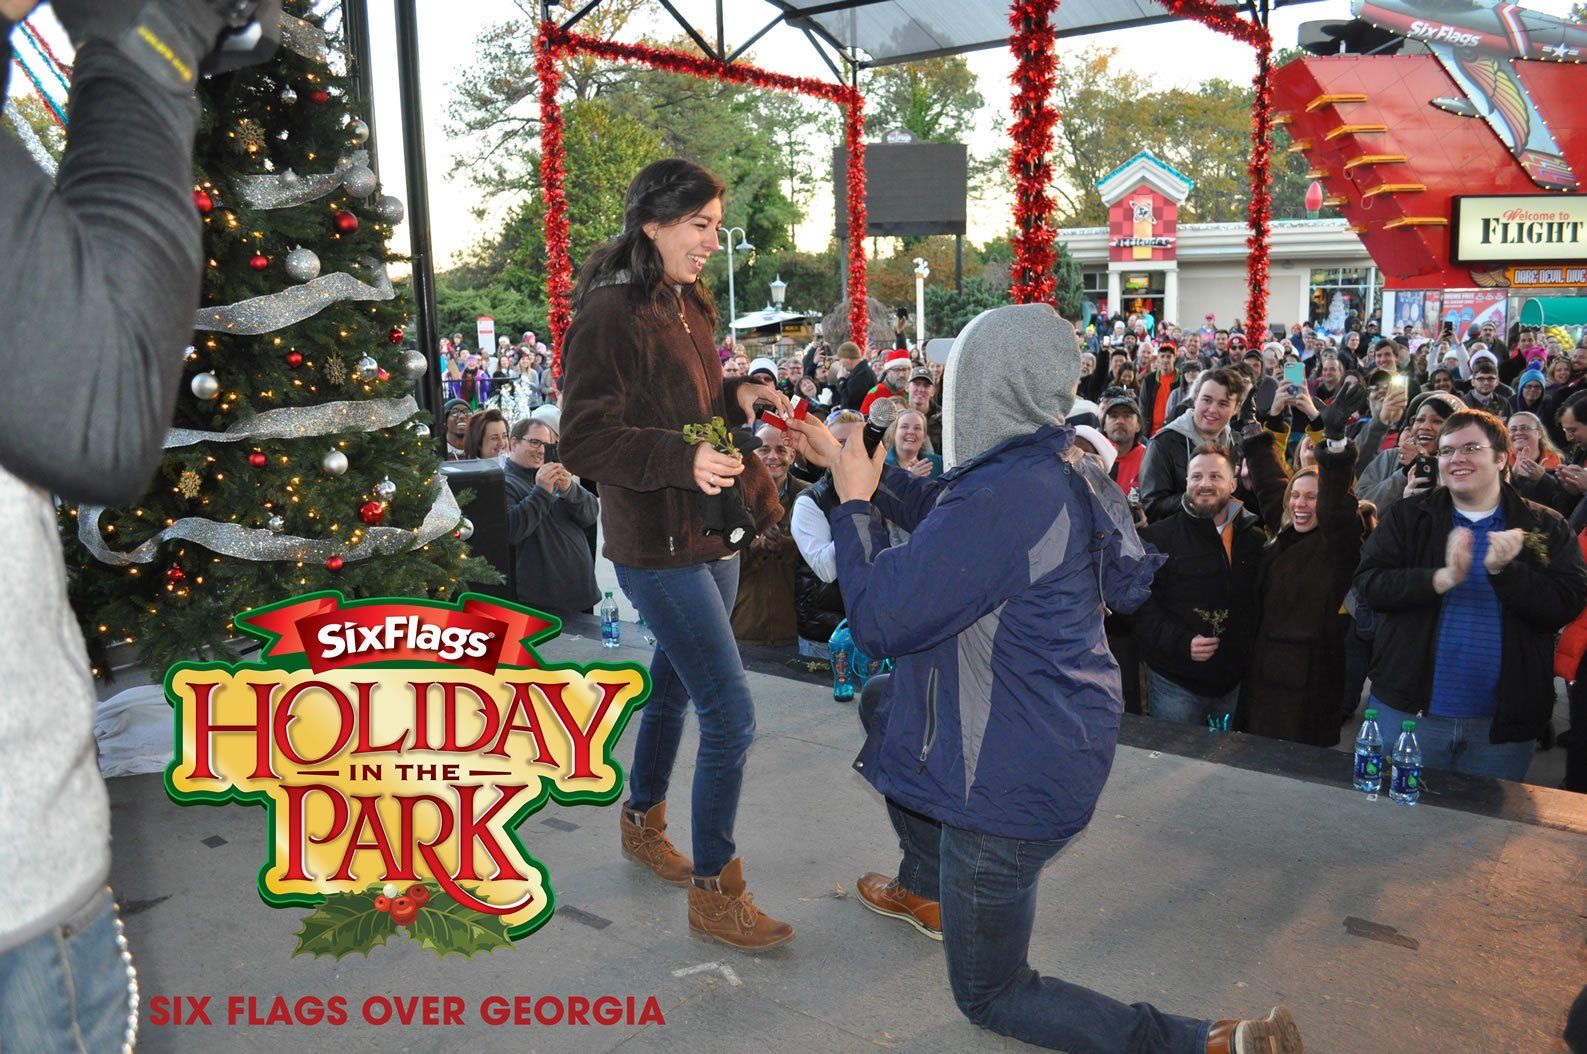 Most Couples Kissing Under the Mistletoe: Six Flags breaks Guinness world record (VIDEO)